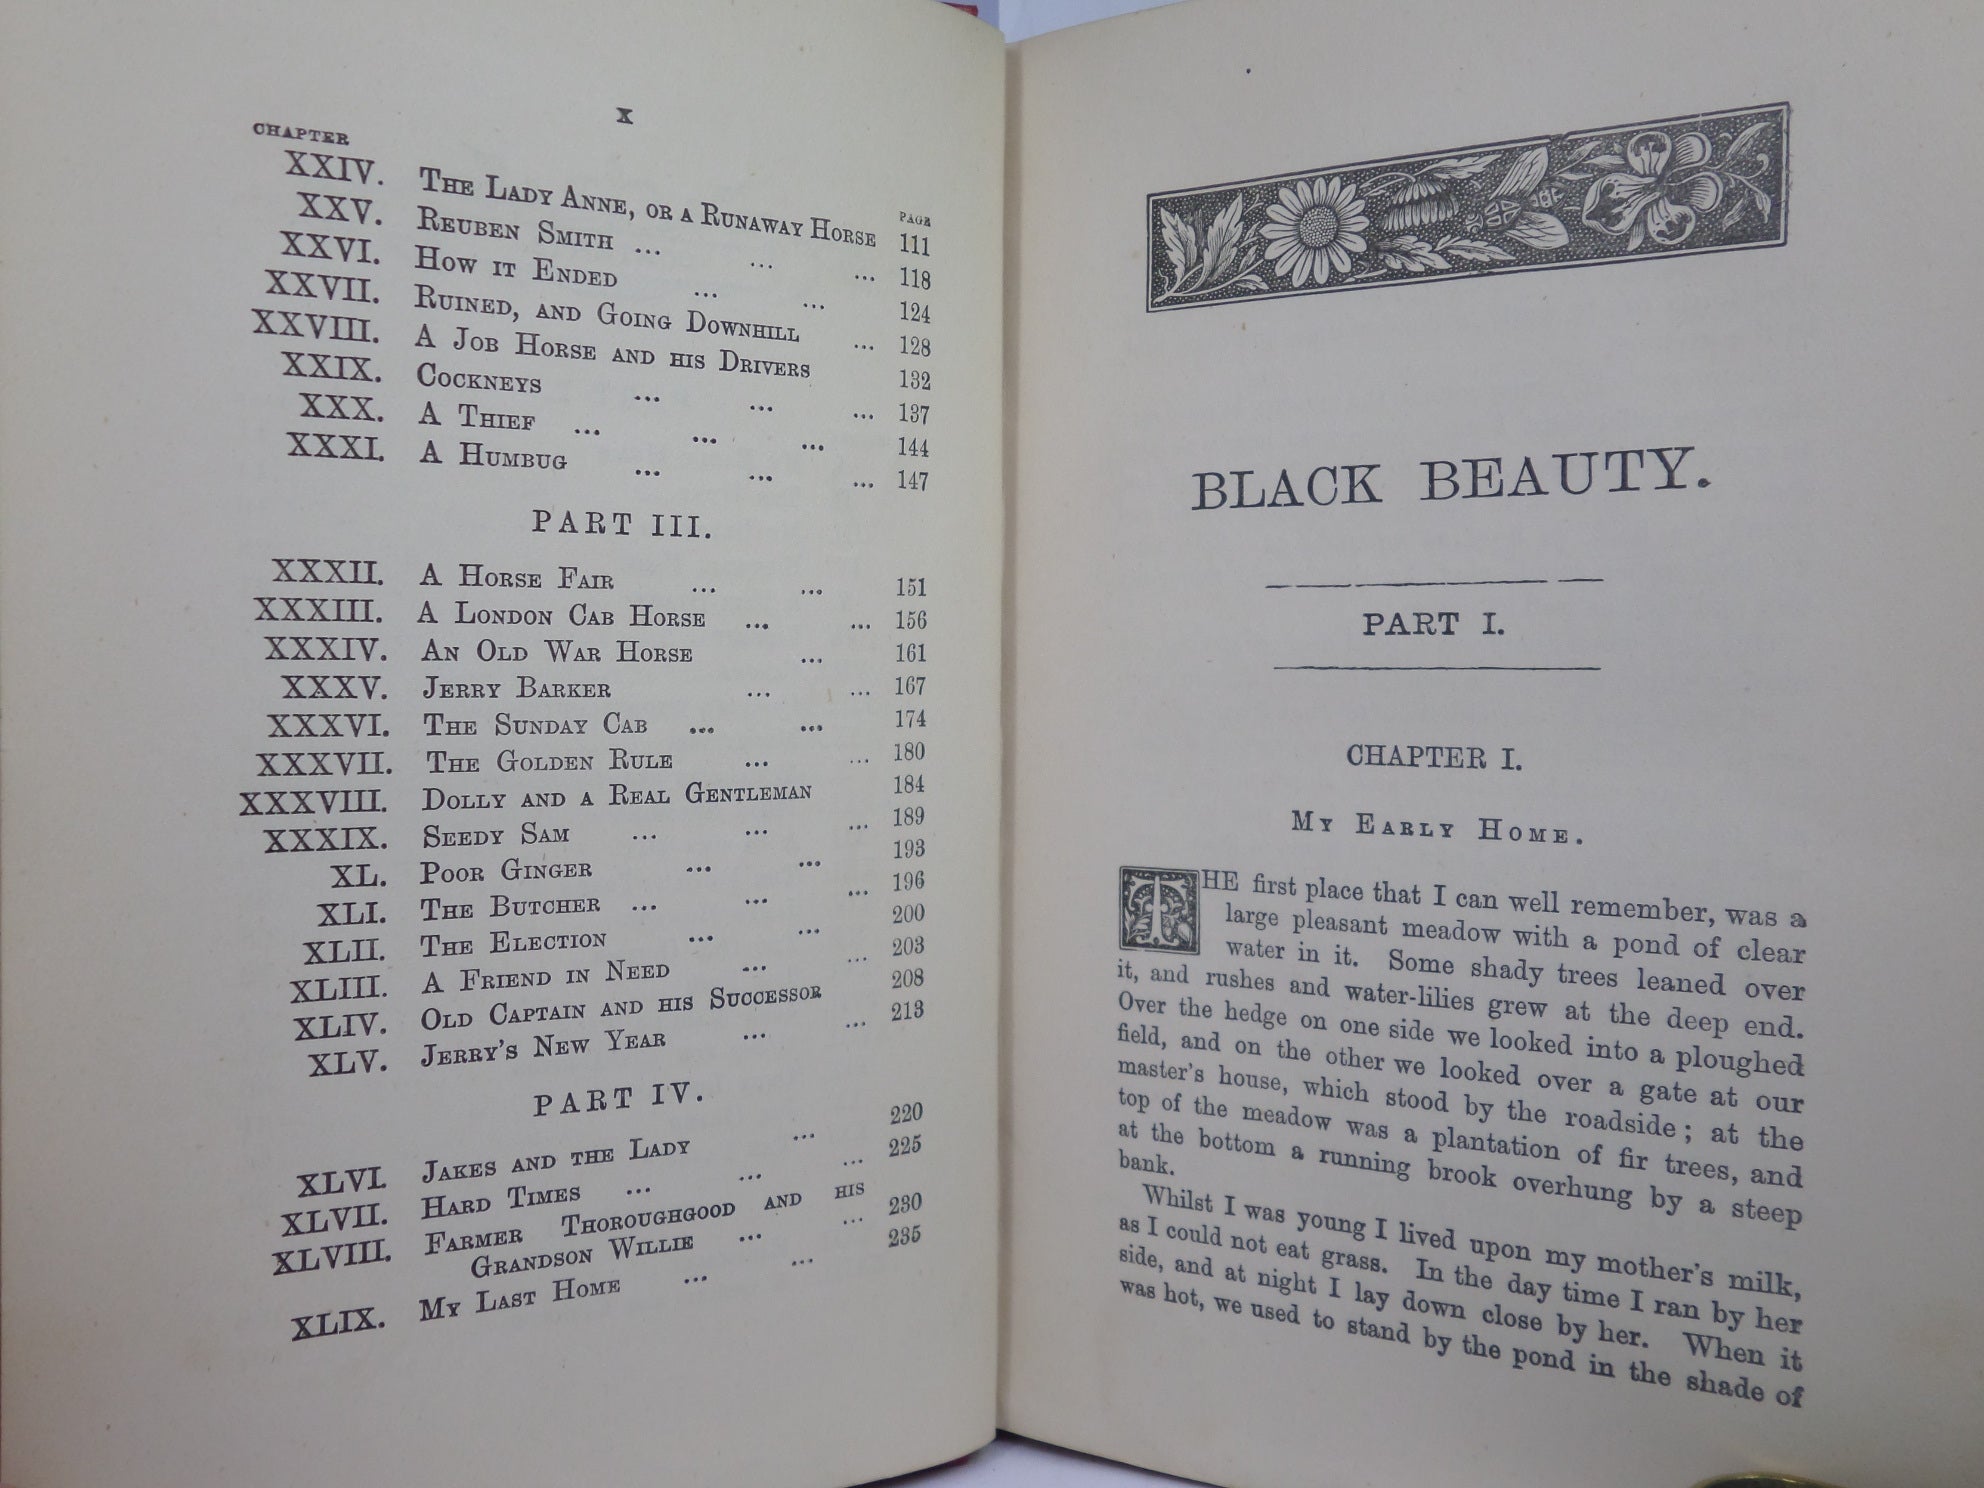 BLACK BEAUTY BY ANNA SEWELL 1896